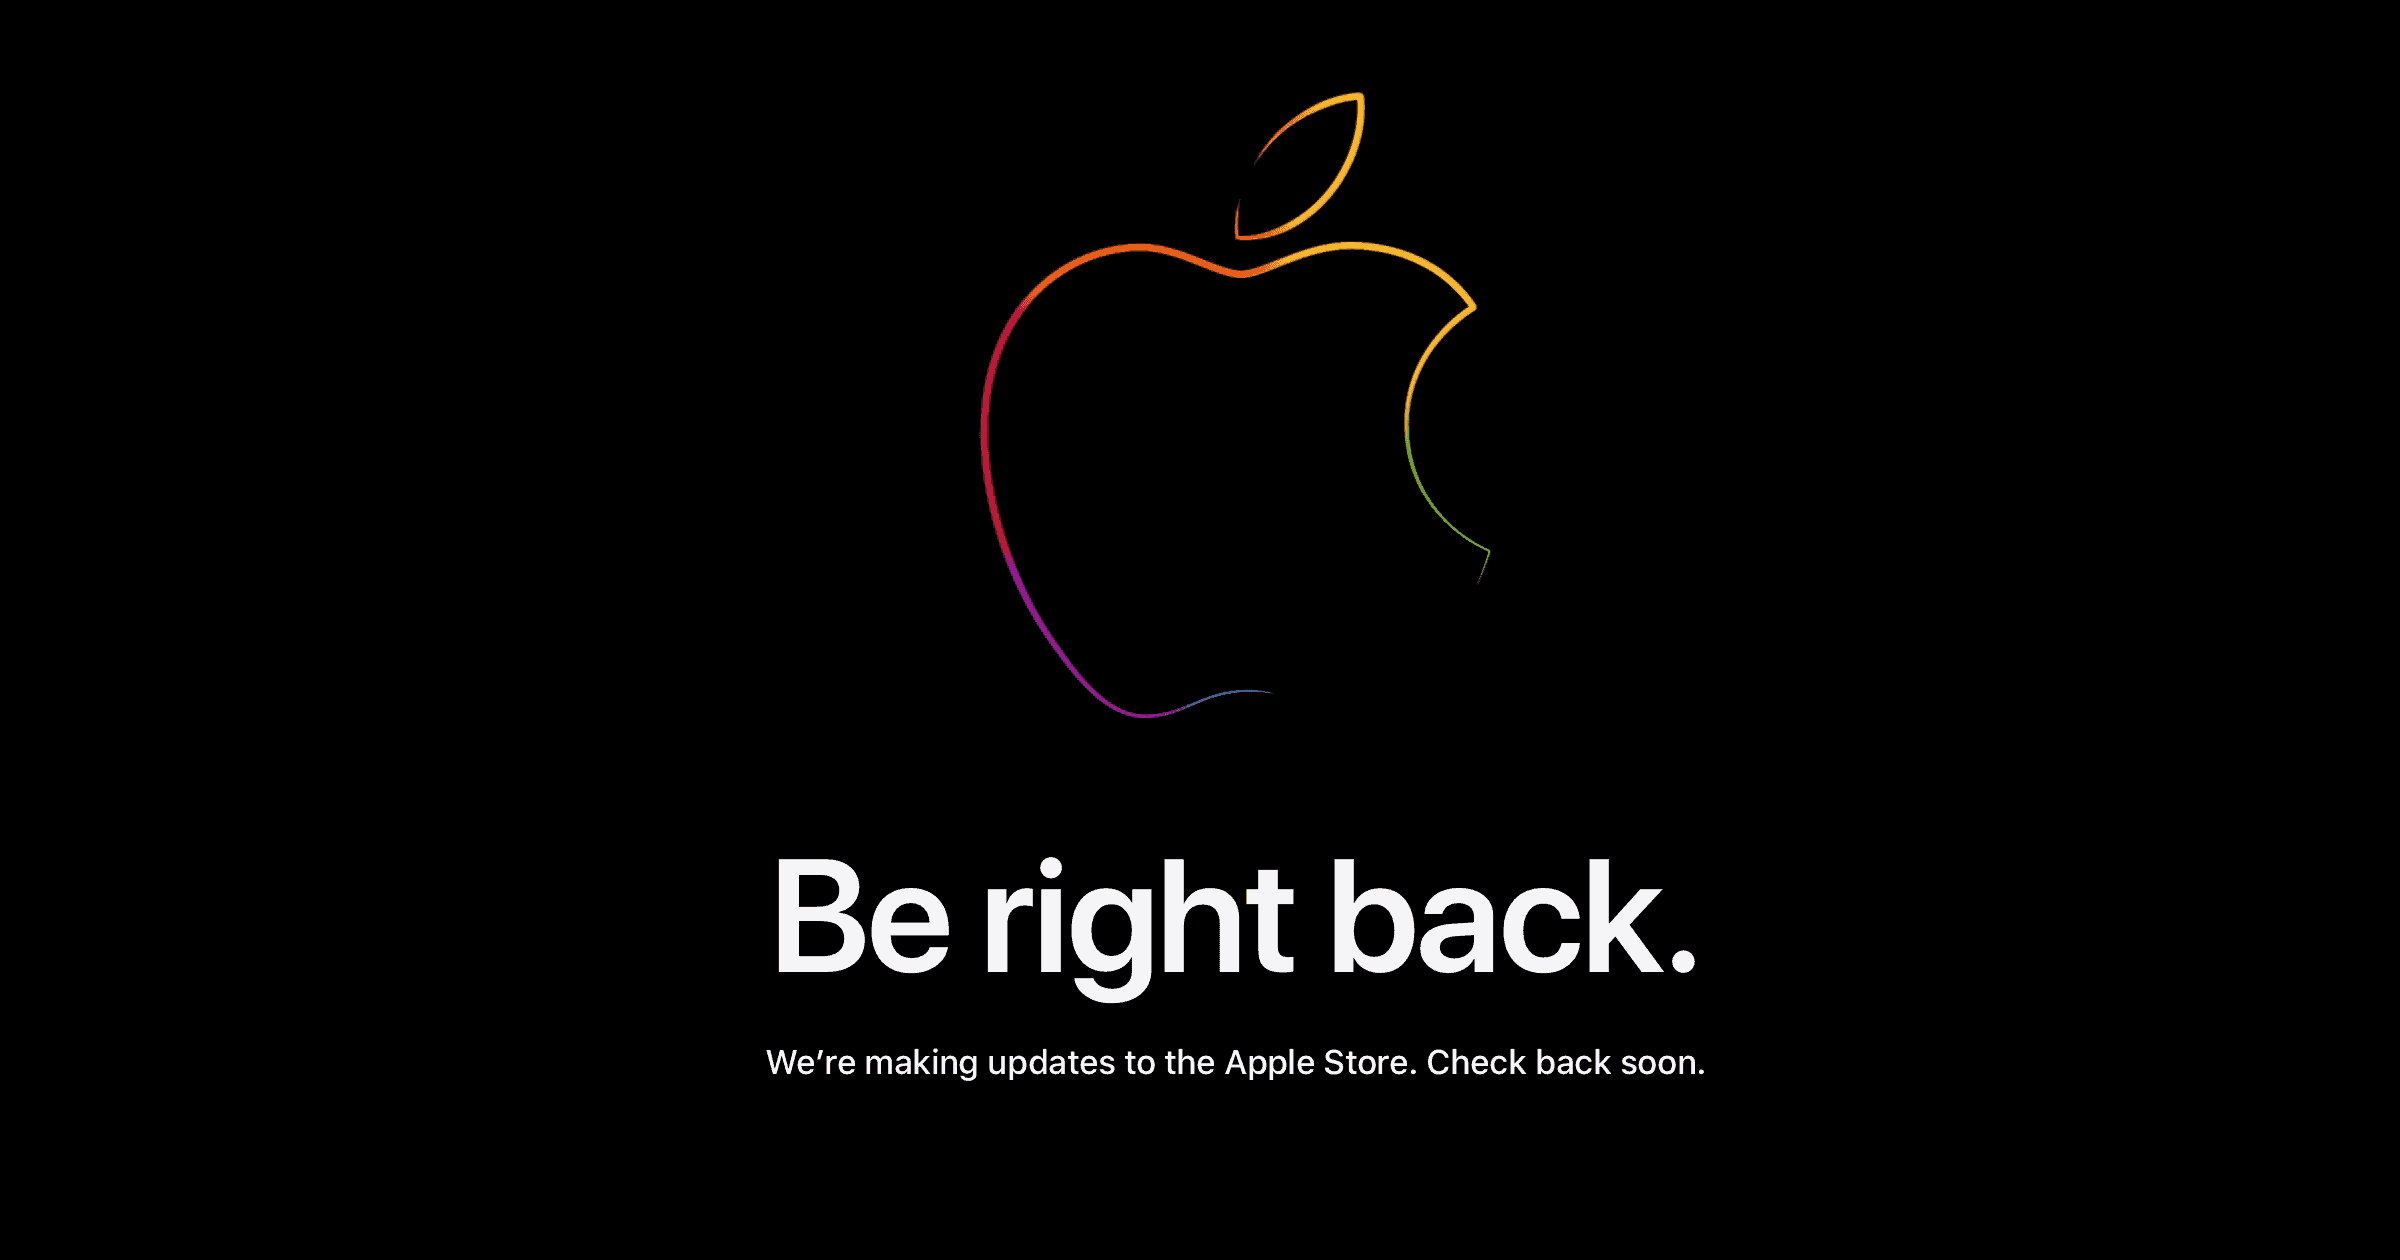 Apple Store down ahead of iPhone 12 event